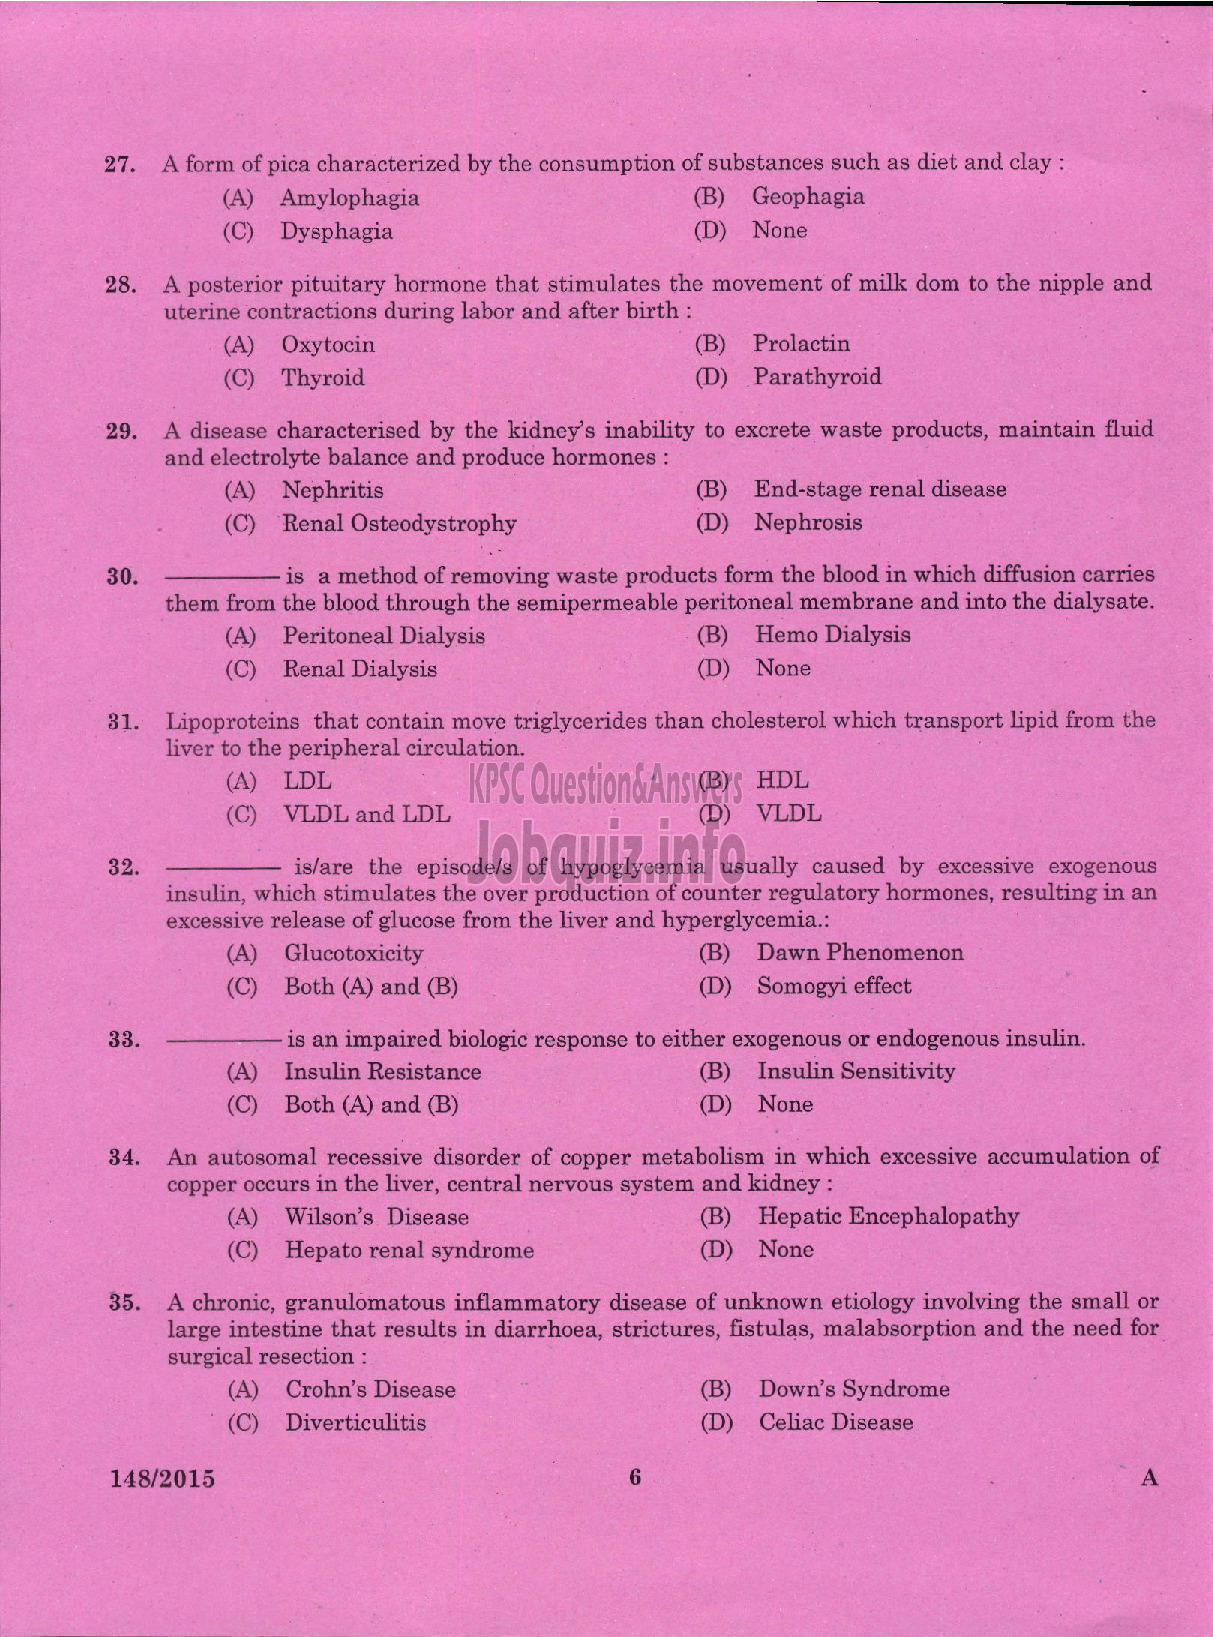 Kerala PSC Question Paper - LECTURER IN HOMESCIENCE FOOD AND NUTRITION COLLEGIATE EDUCATION-4